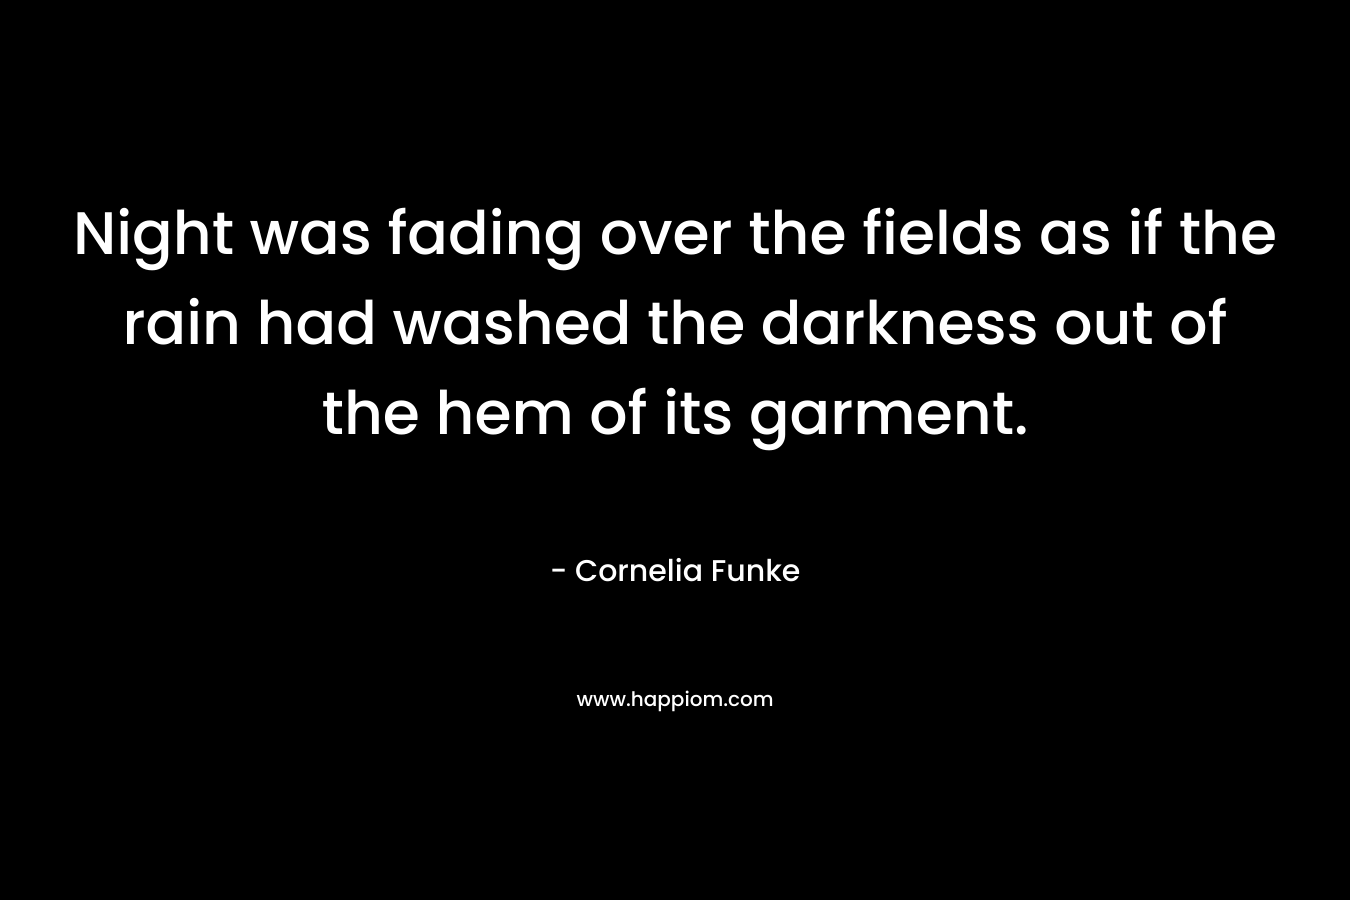 Night was fading over the fields as if the rain had washed the darkness out of the hem of its garment. – Cornelia Funke